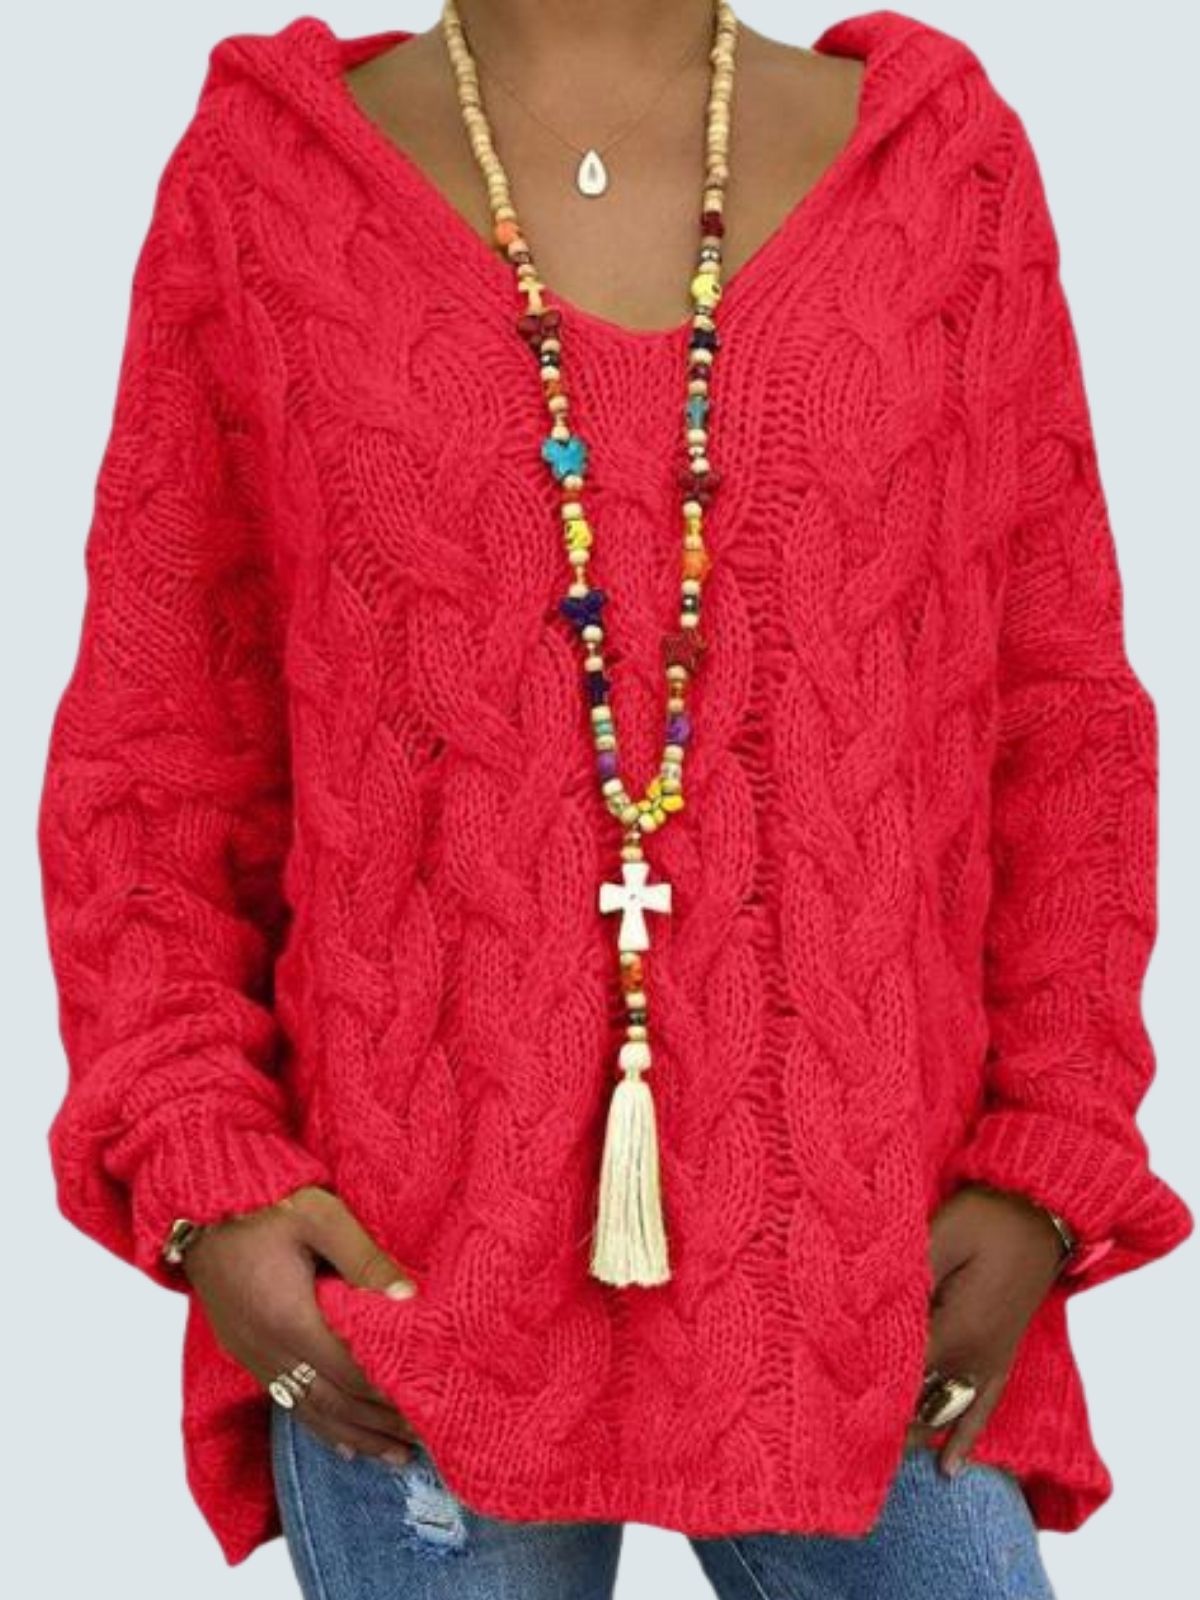 Women's Braid Knit Long Sleeve Hooded Sweater Coral